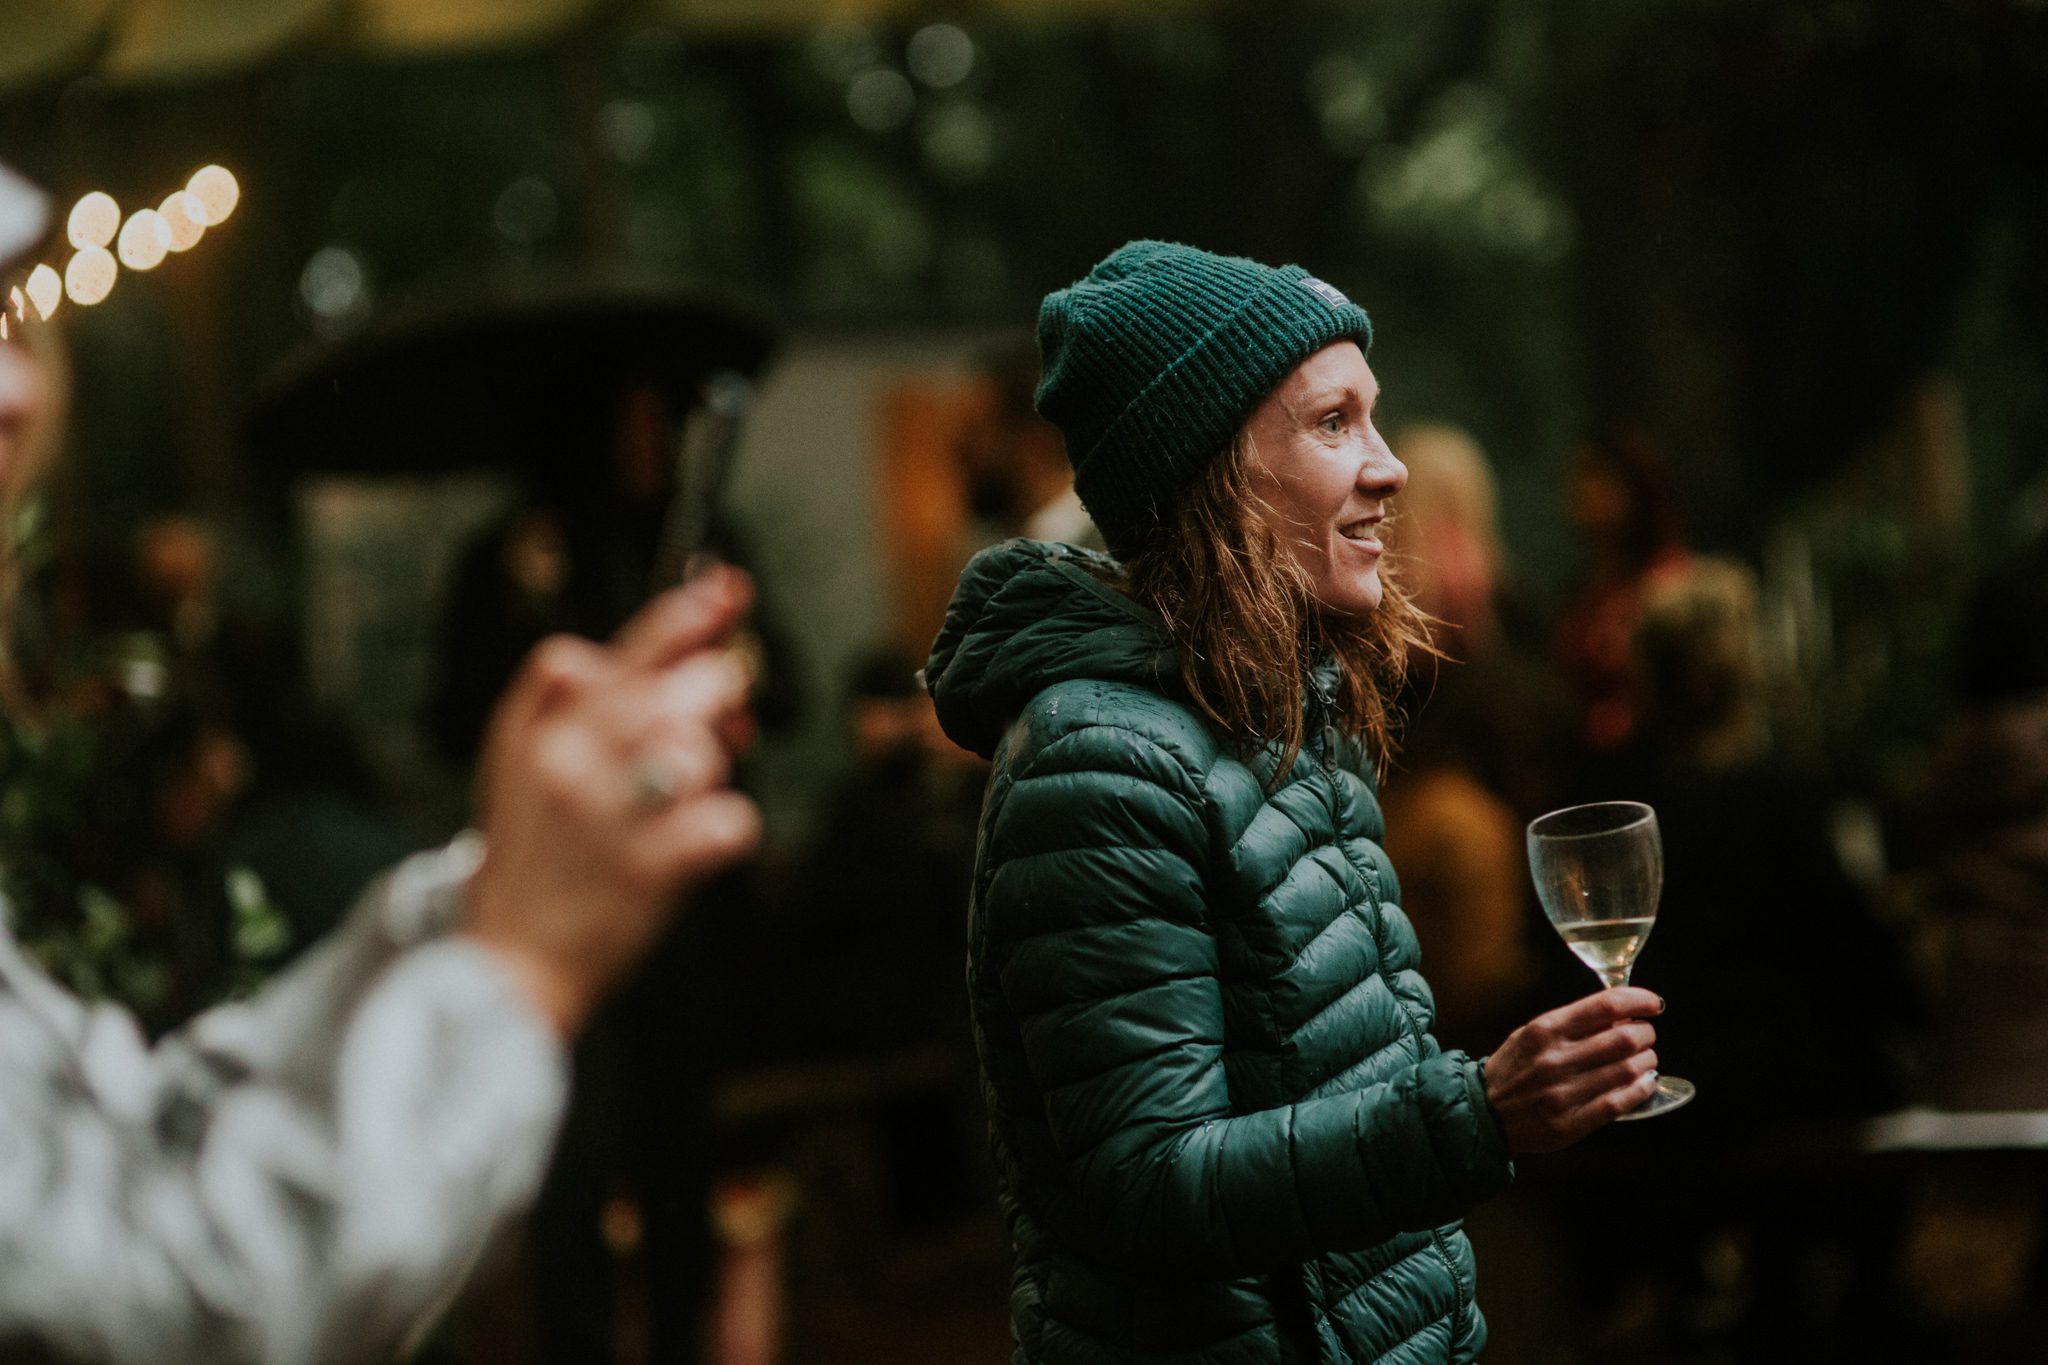 A wedding guest drinks wine in the rain